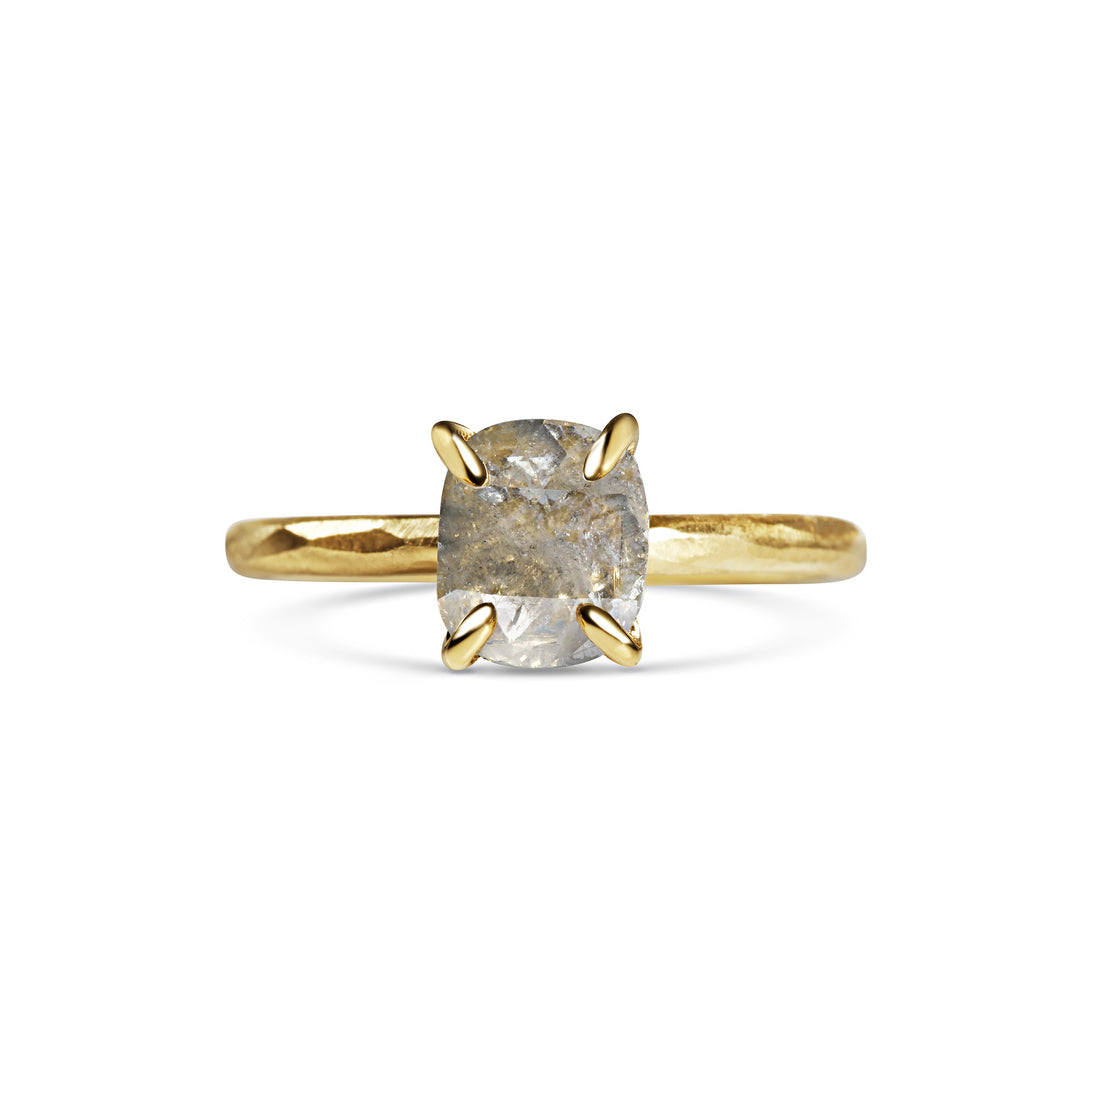  Grey Oval Diamond Ring by Michelle Oh | The Cut London